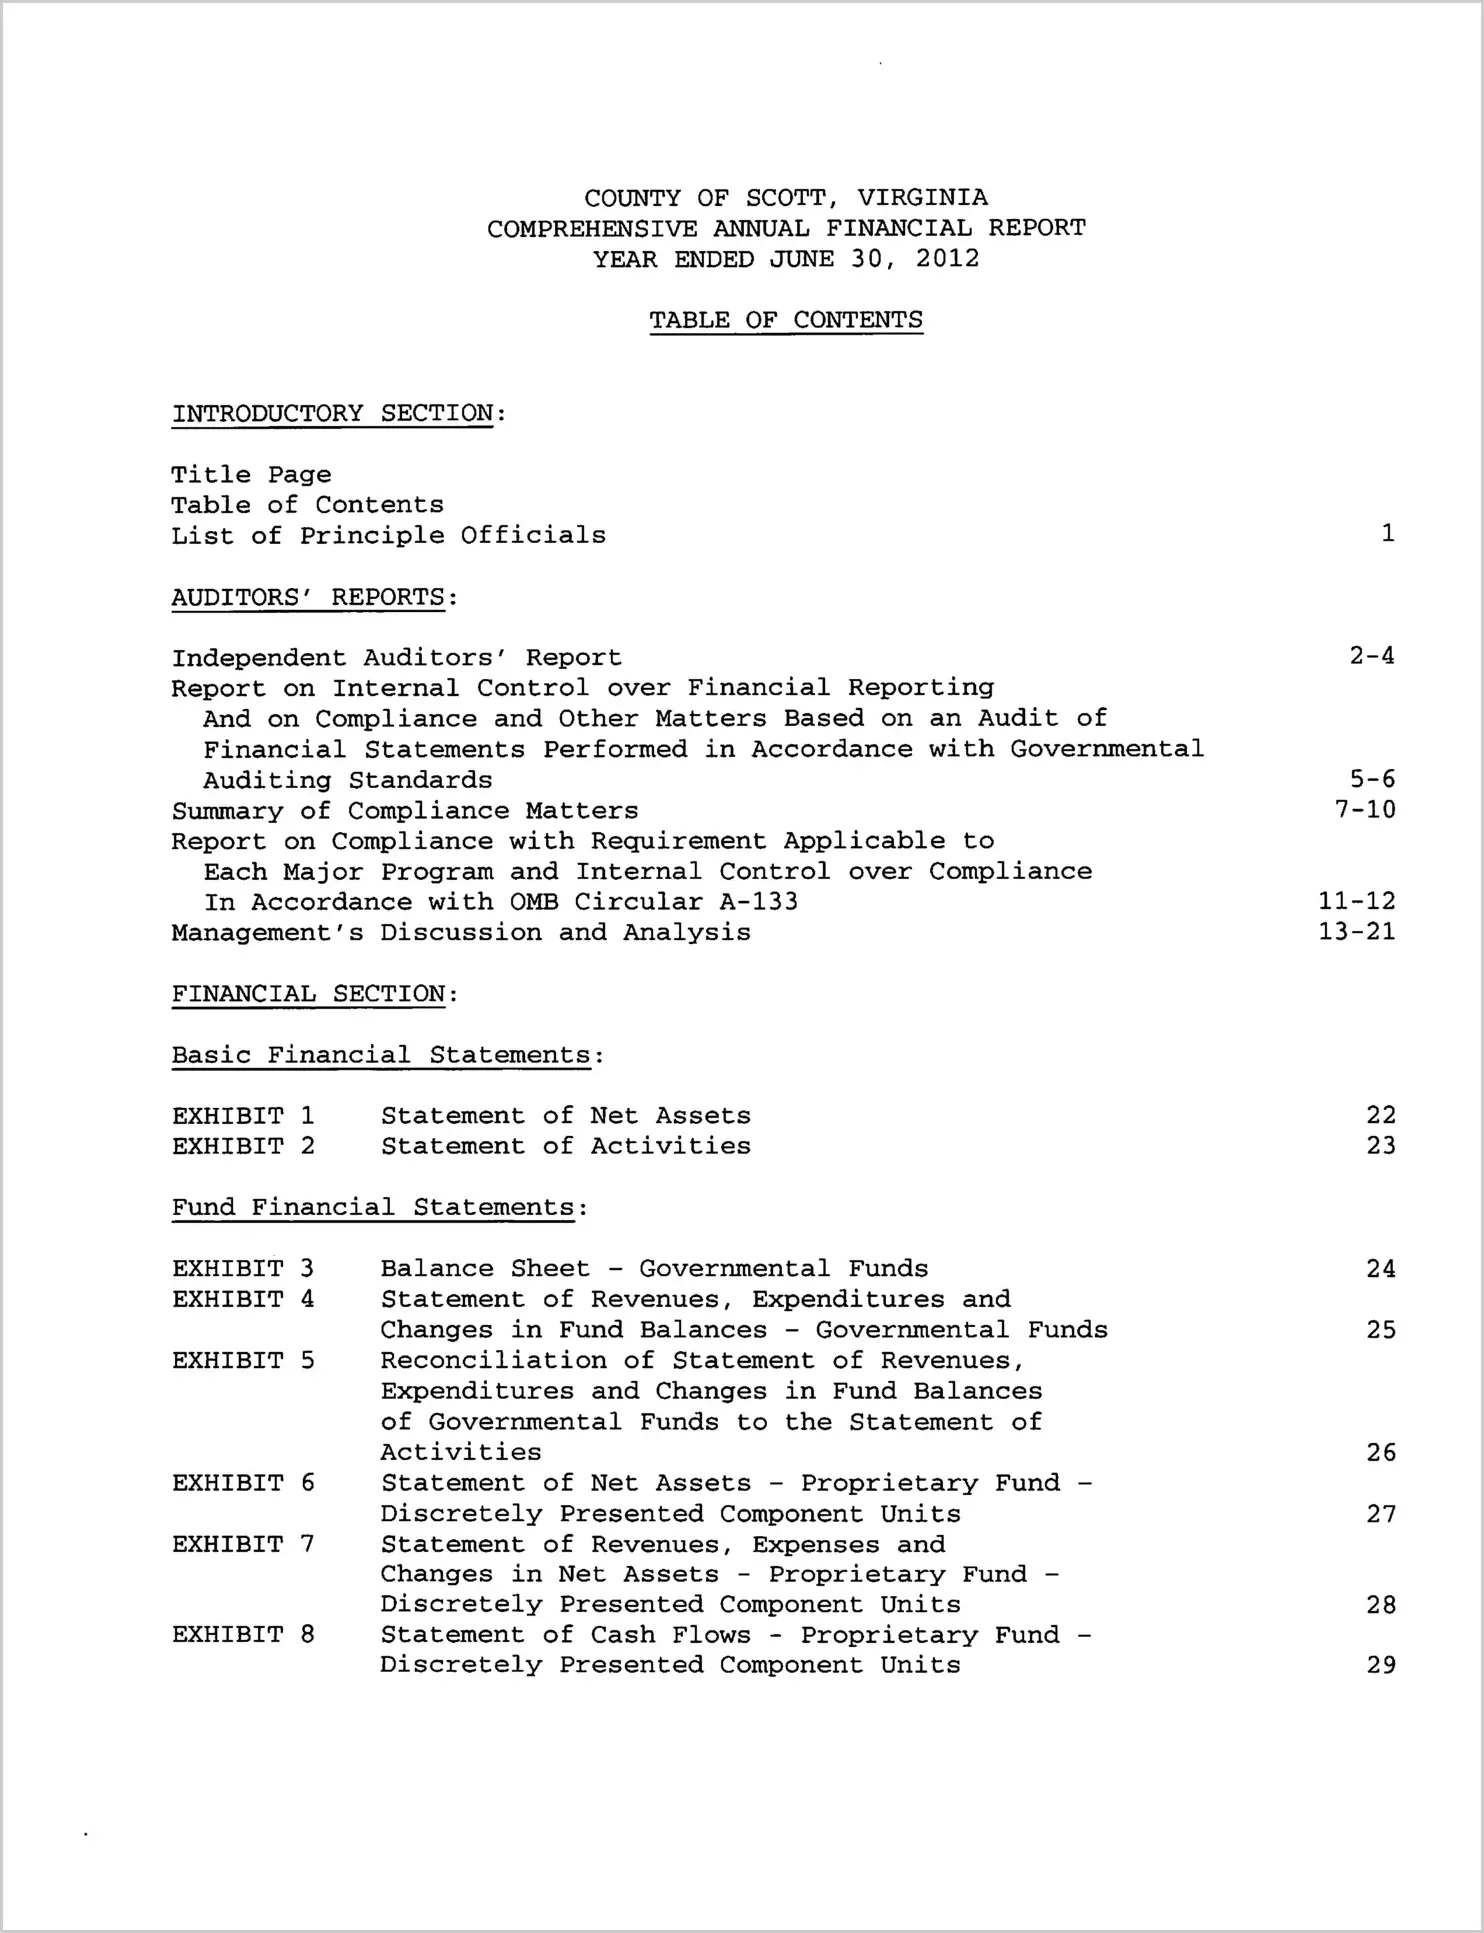 2012 Annual Financial Report for County of Scott